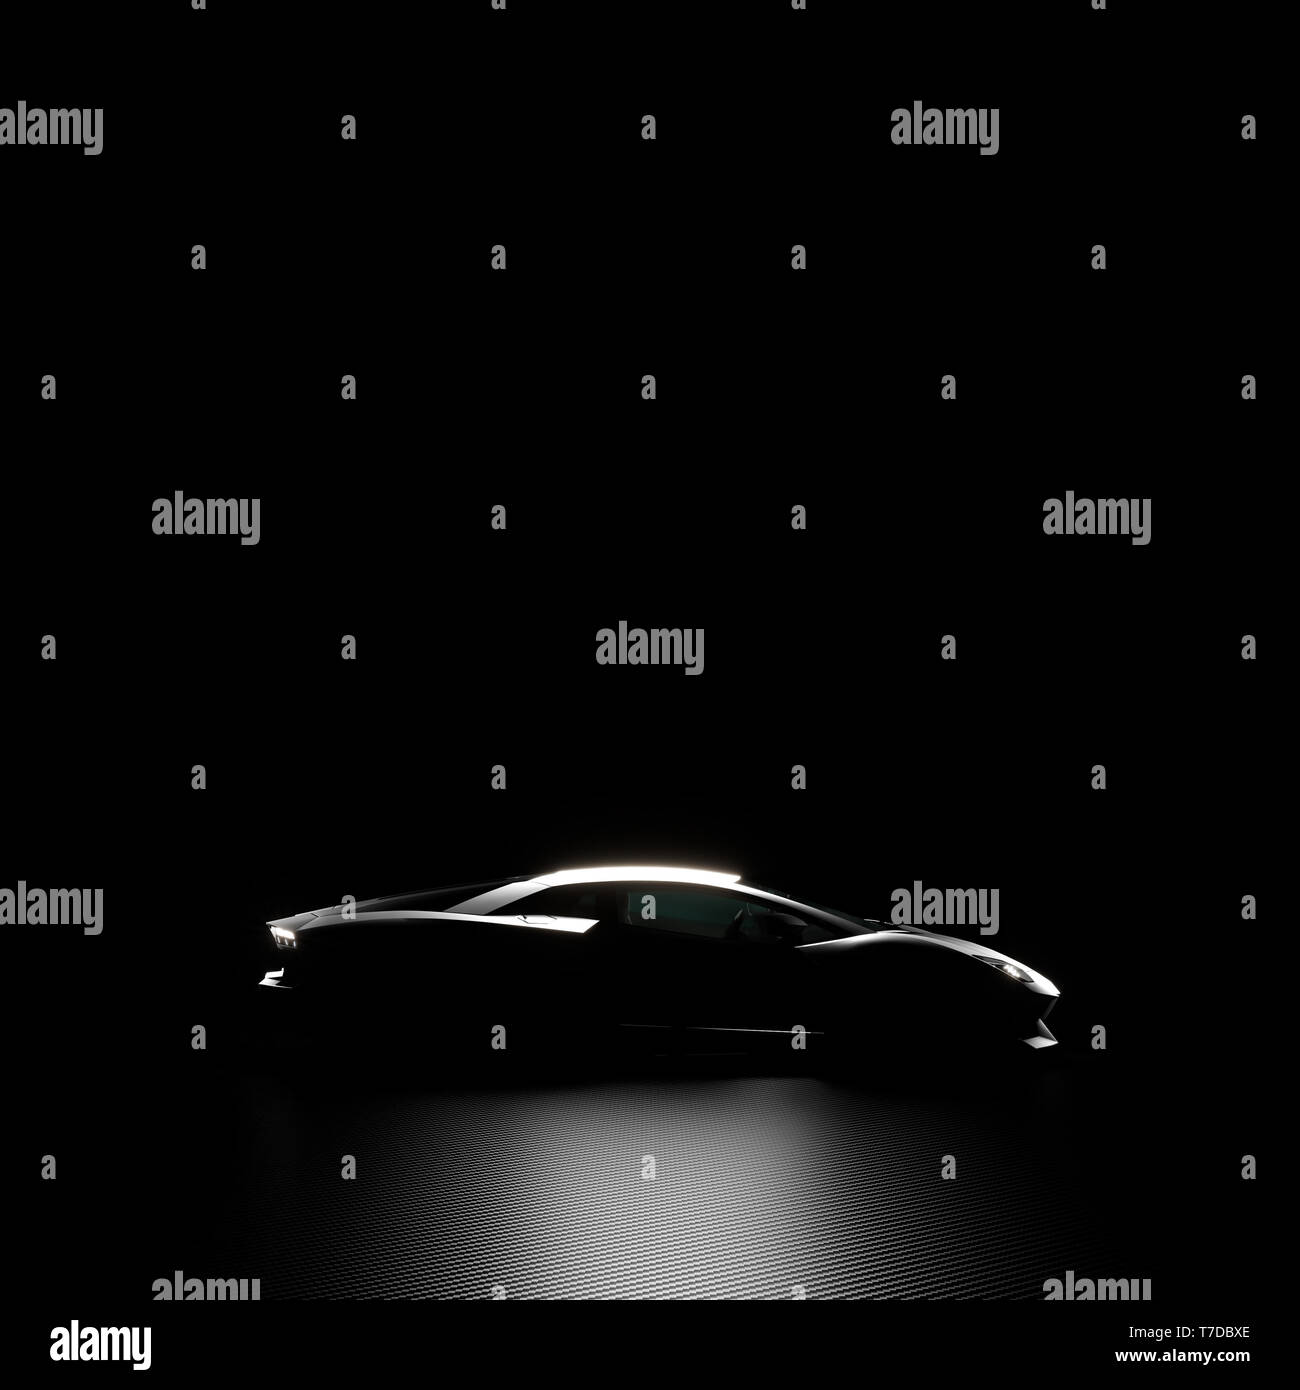 3d render image of a sports car with its headlights on. Dark background with carbon fiber texture. Side view. Stock Photo